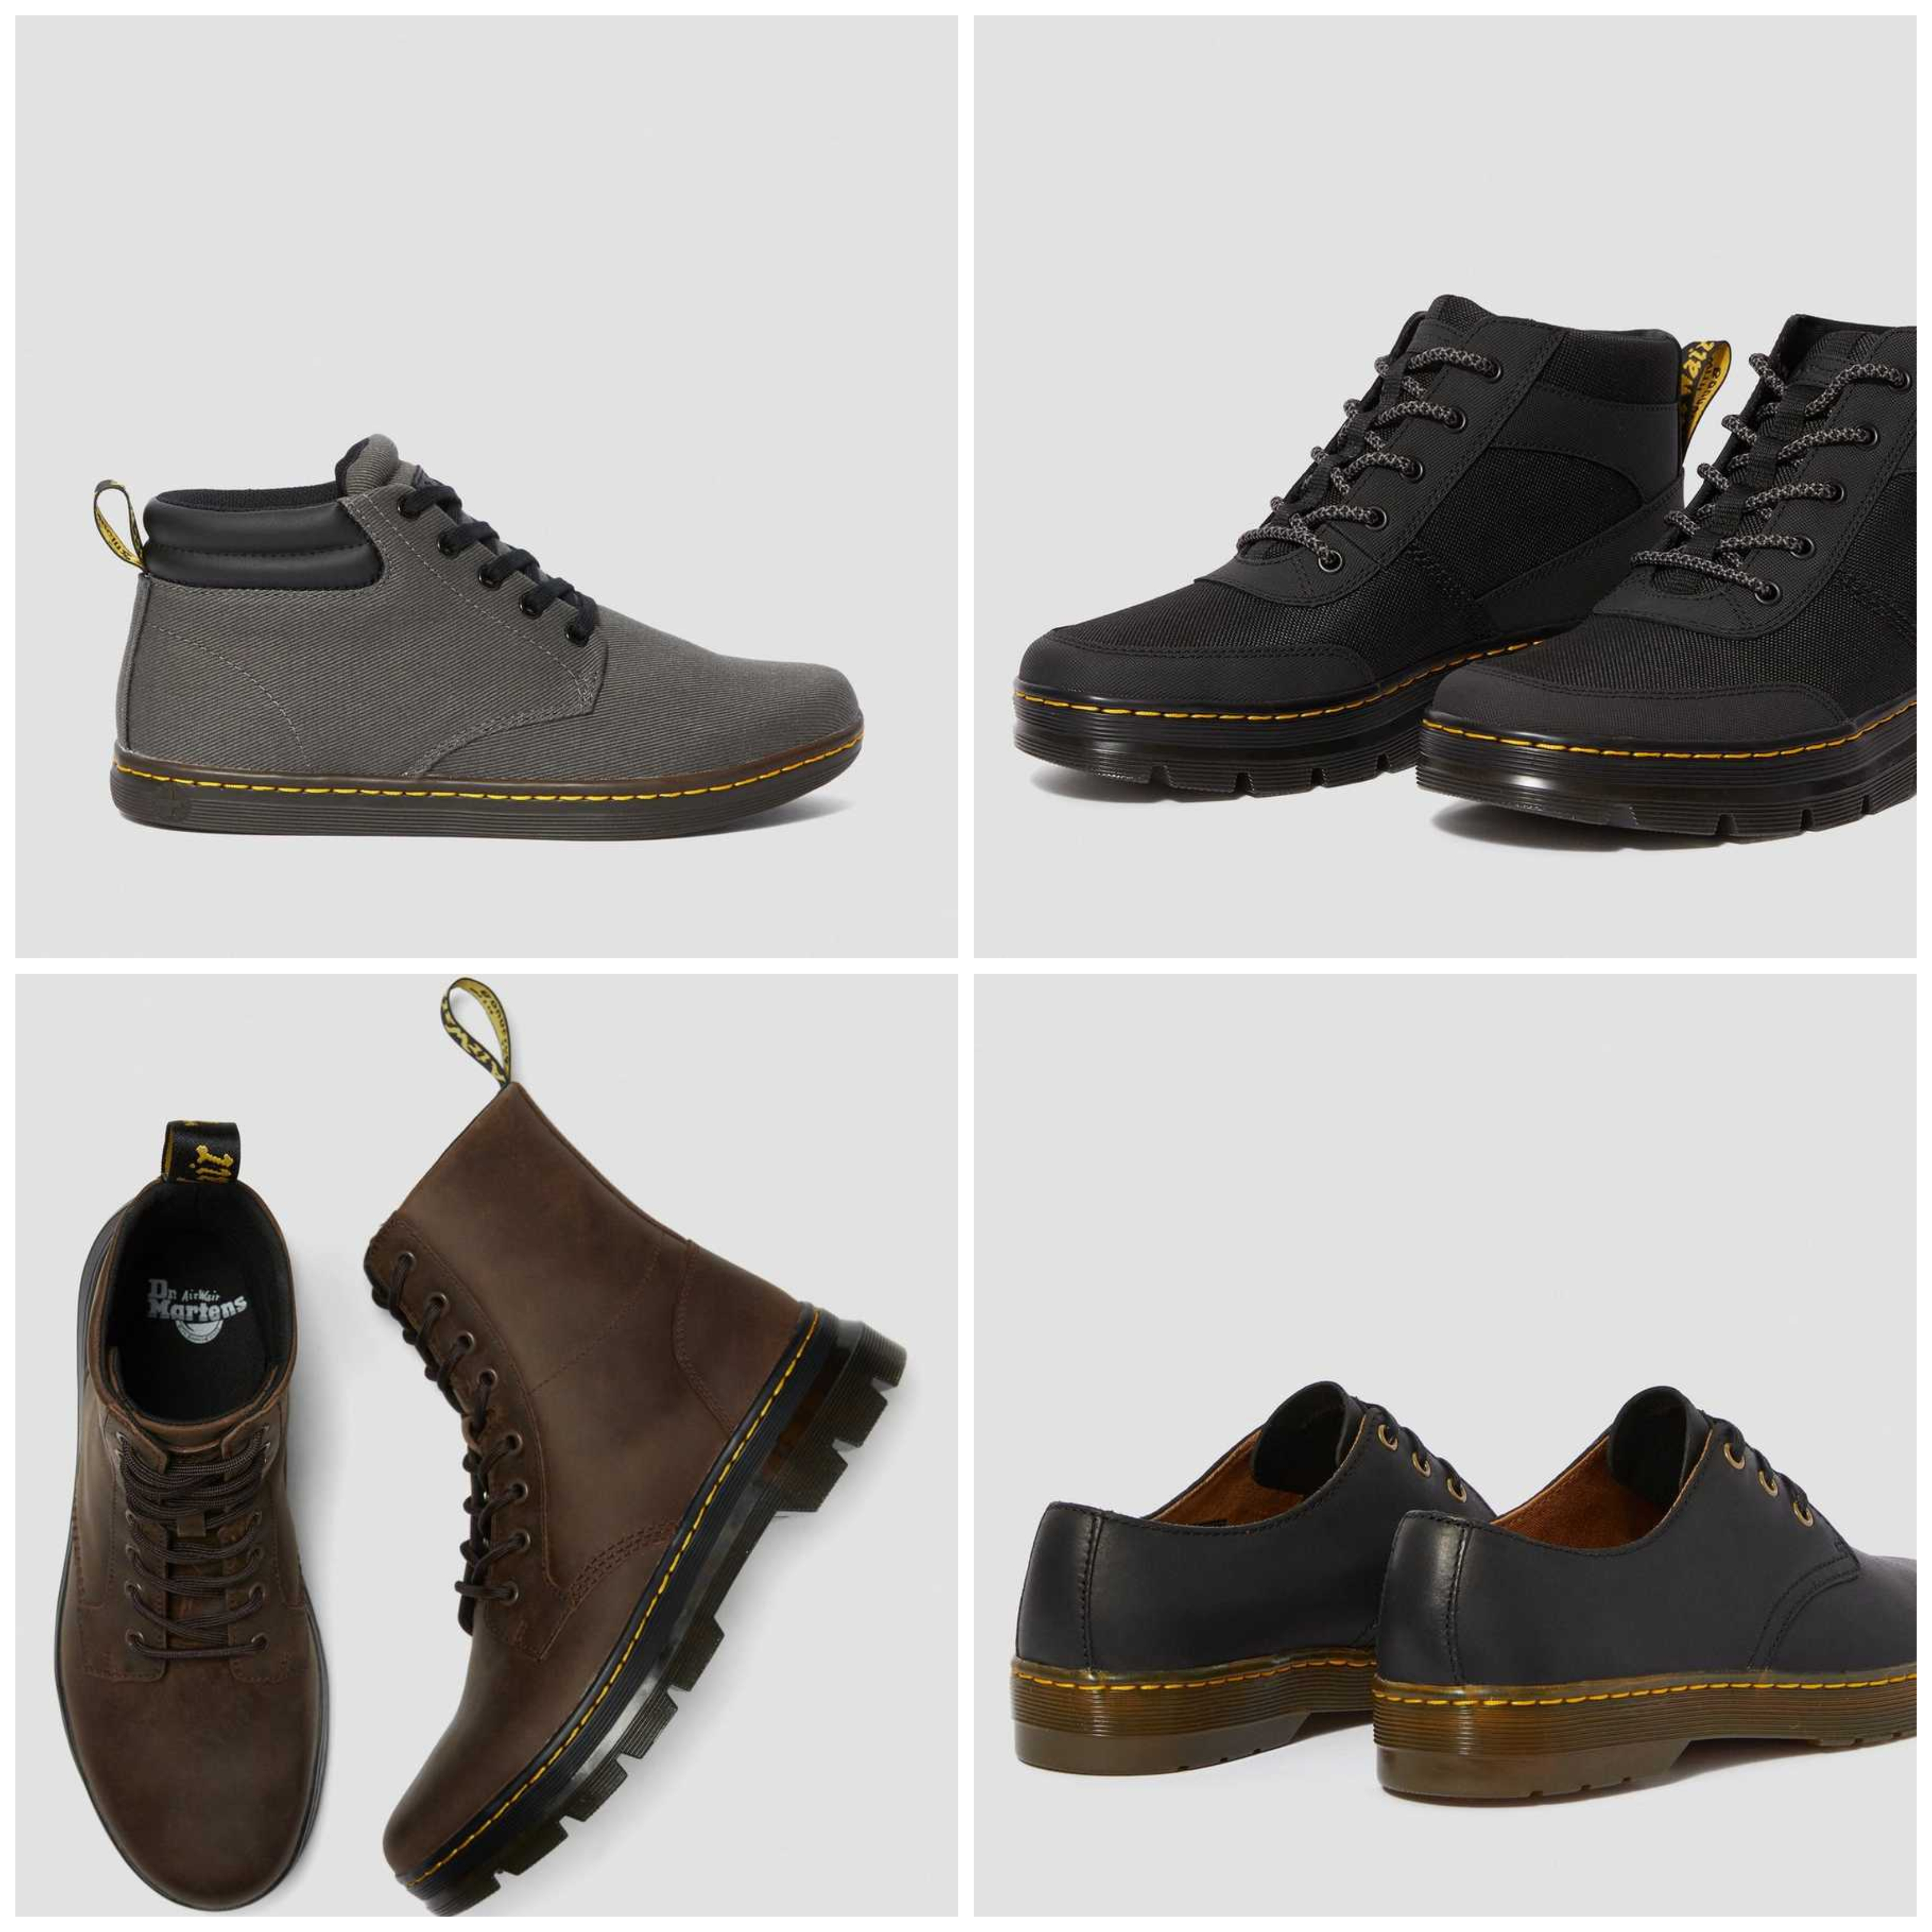 Looking For Some New Boots? Dr. Martens Has Tons Of Casual Styles At An ...